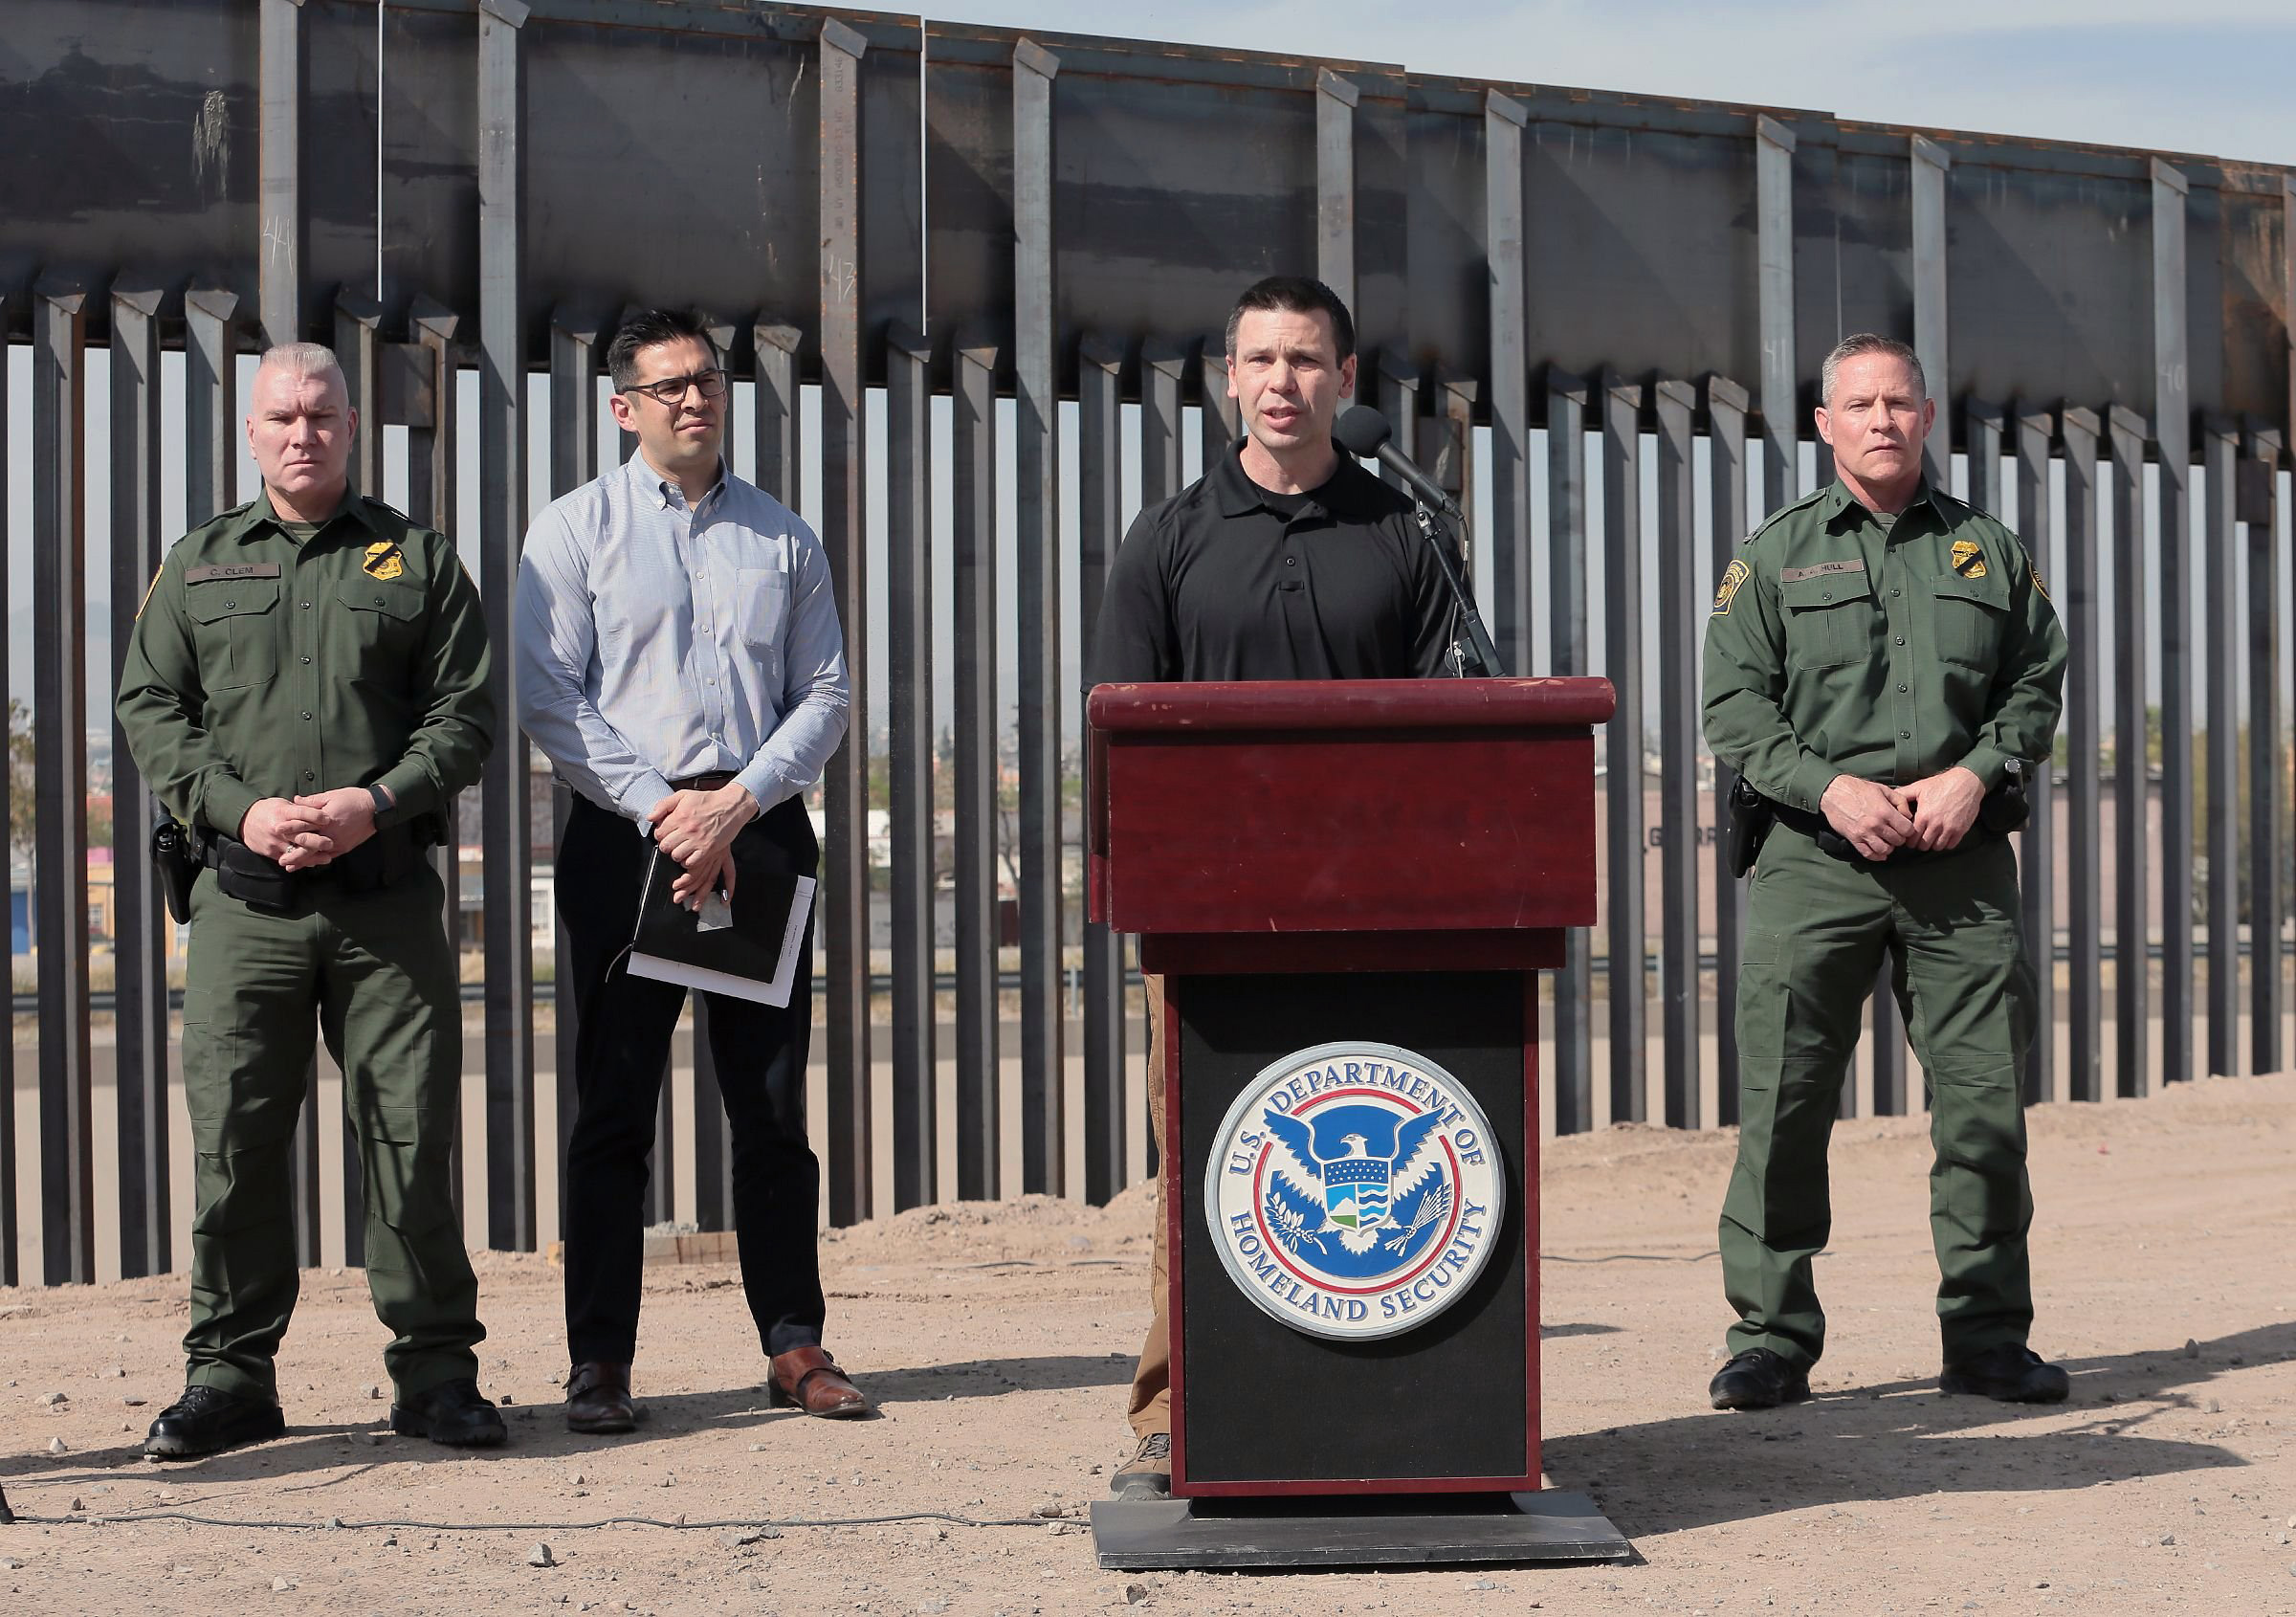 U.S. Customs and Border Protection Commissioner Kevin K. McAleenan, with the bollard border fence in the background, held a press conference in El Paso, Texas, on Mar. 27, 2019. McAleenan said the border has hit its "breaking point" due to flood of migrants in what he described as "a system that is broken and overwhelmed. (Mark Lambie—El Paso Times/USA Today/Sipa)